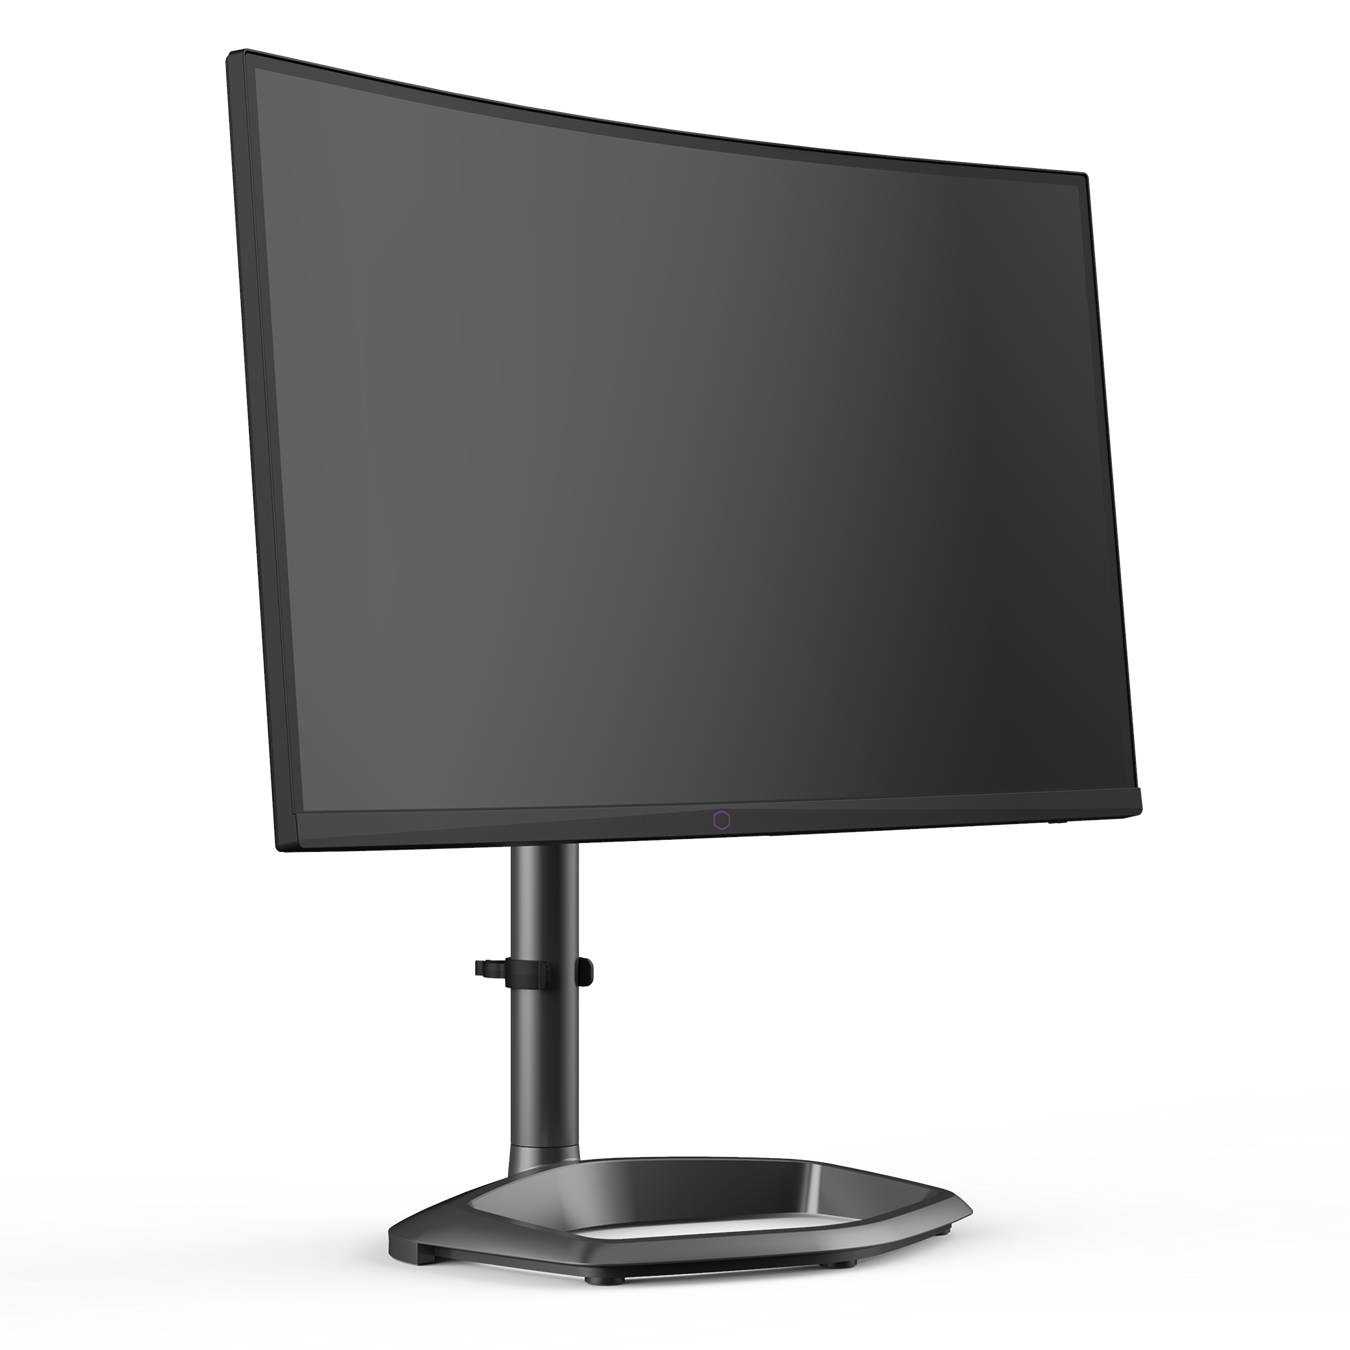 GM27-CFX - With an enhanced VA panel technology, the possibility of light leakage across the entire screen is greatly minimized.